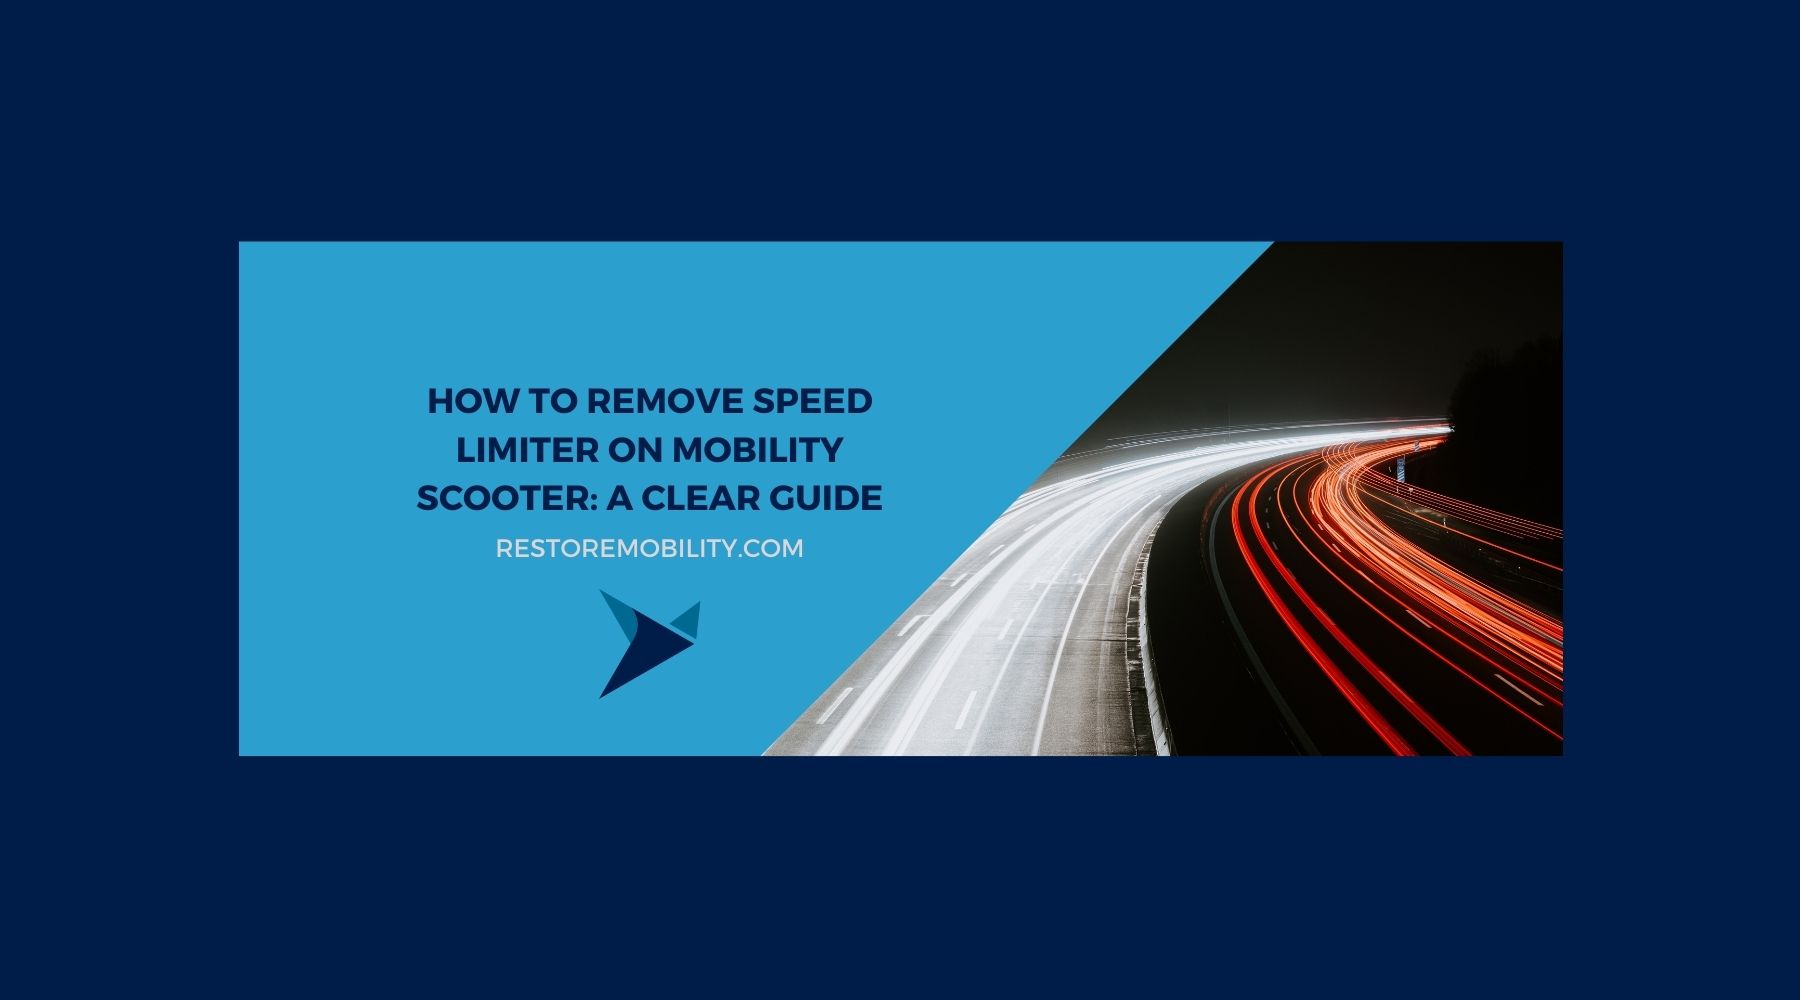 How to Remove Speed Limiter on Mobility Scooter